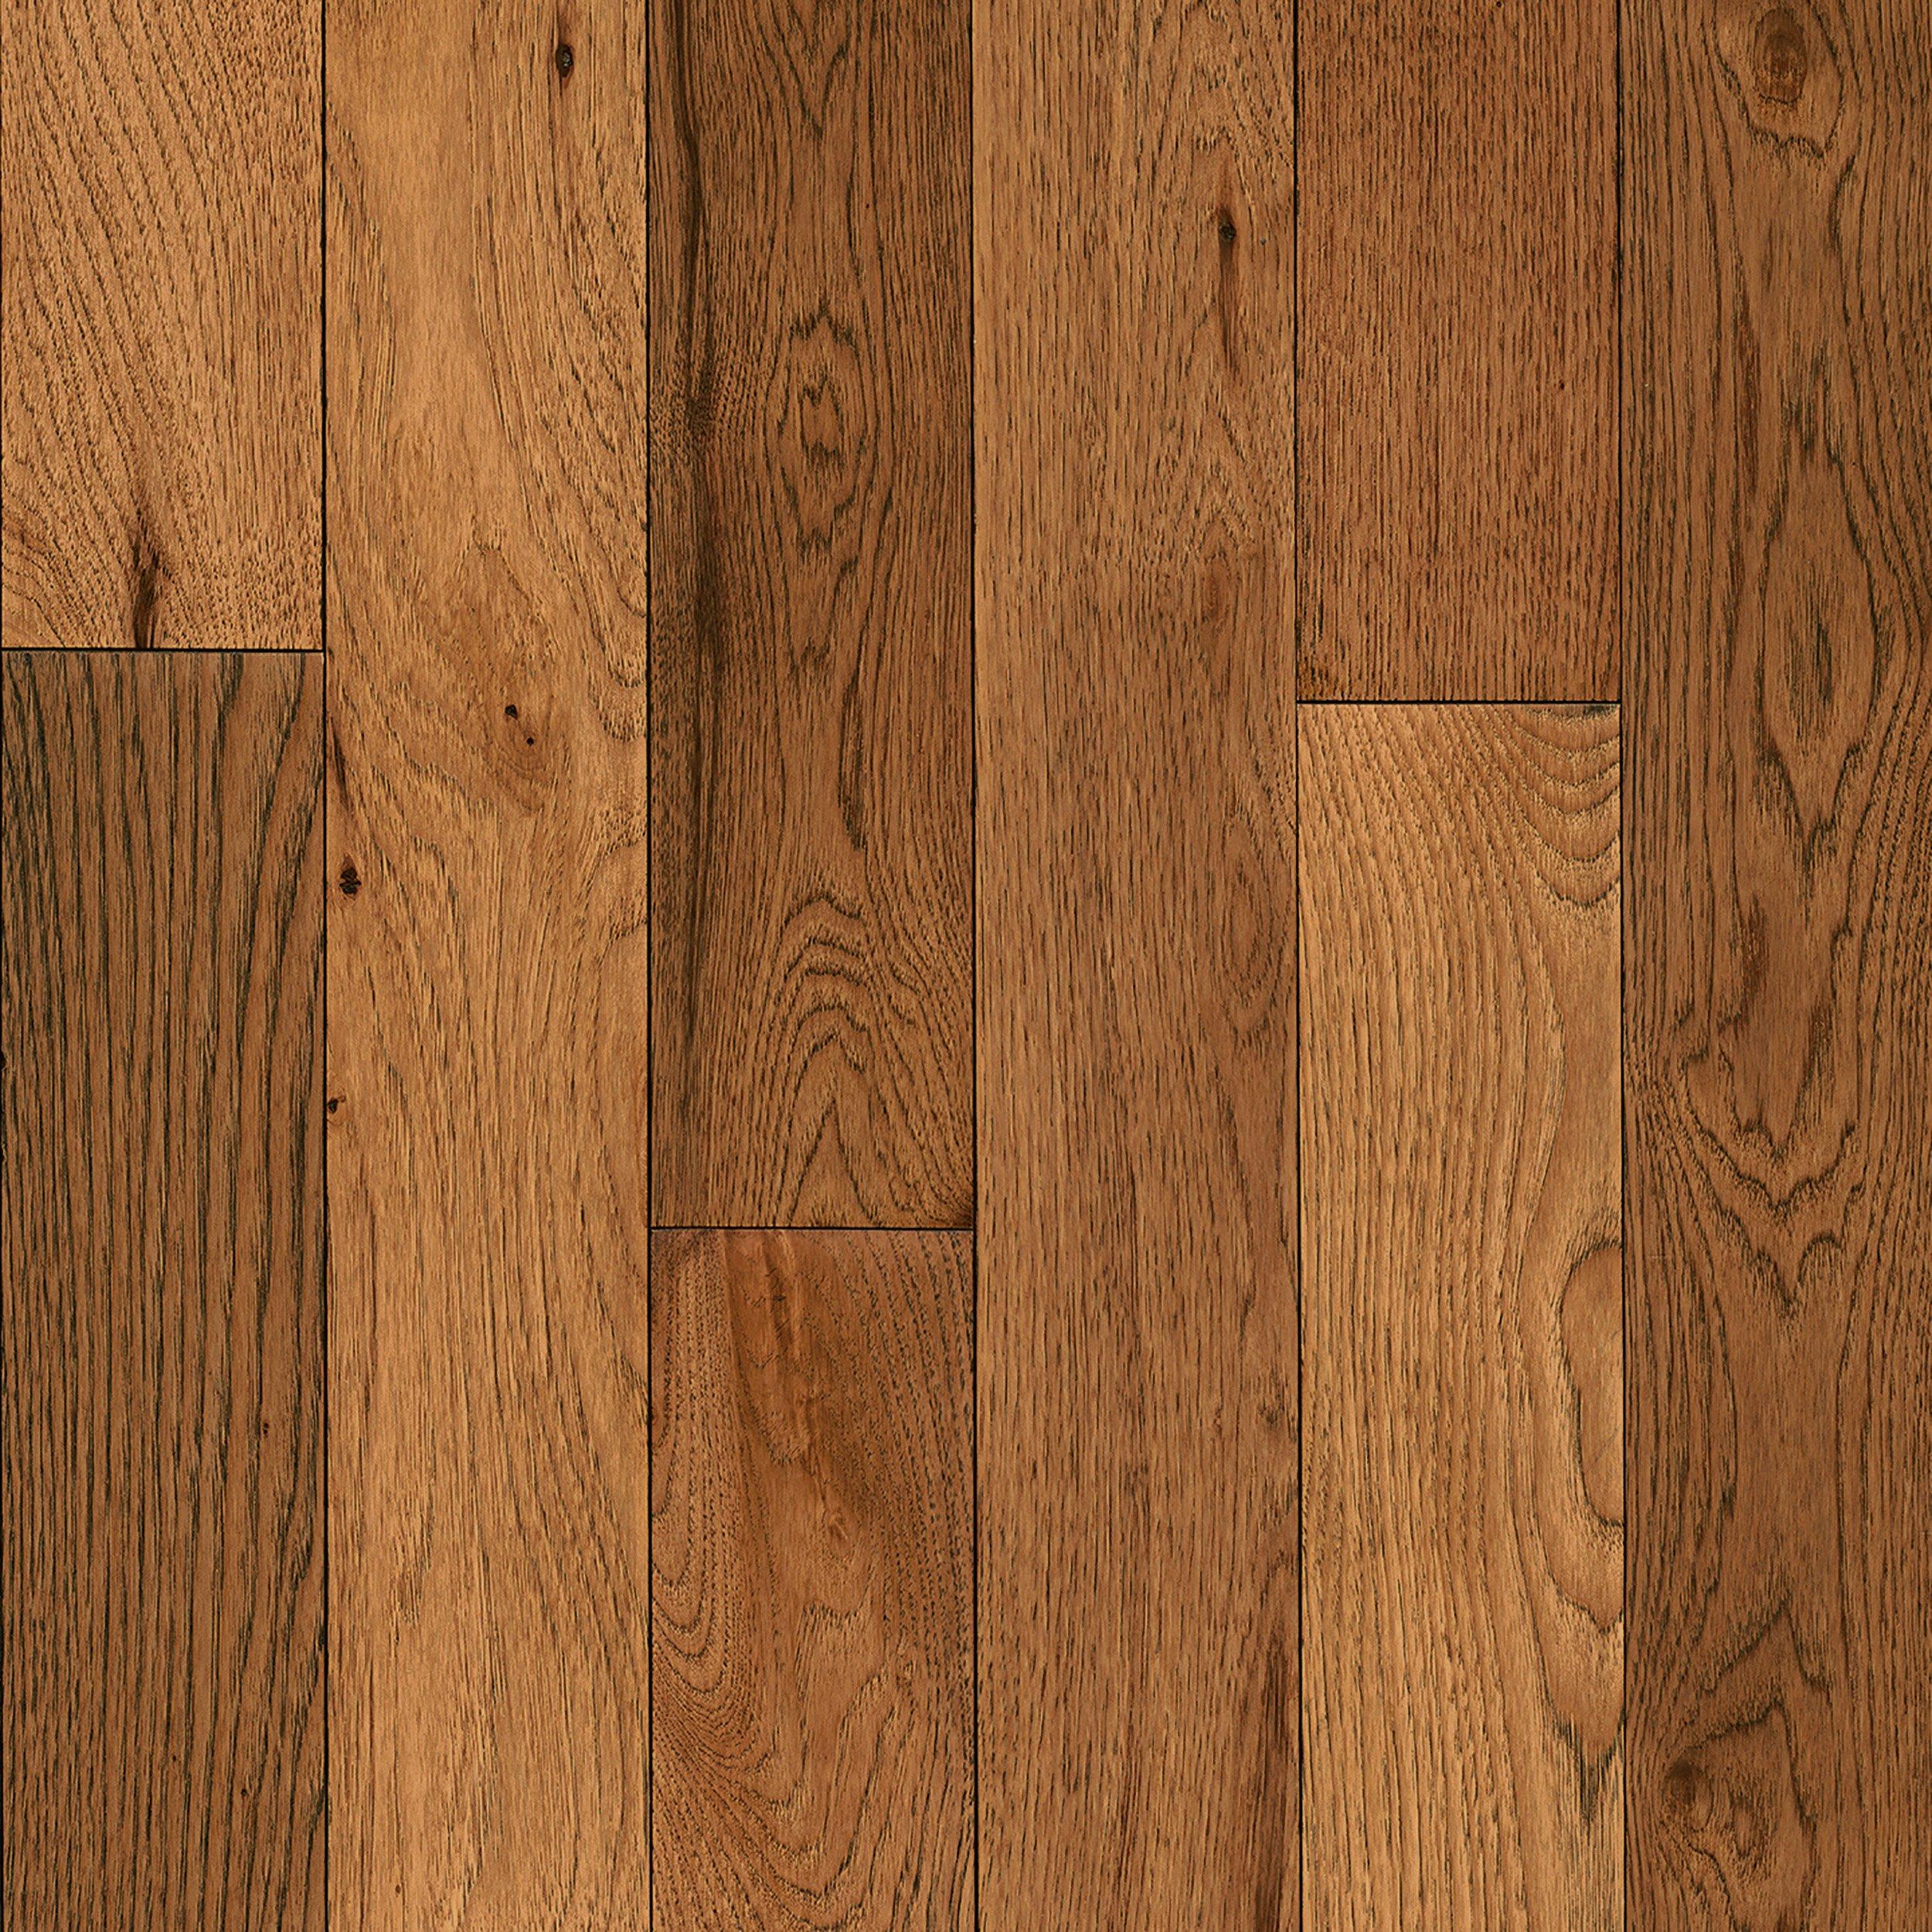 Copper Canyon Hickory Wire Brushed, Bruce Hardwood Floor Hickory